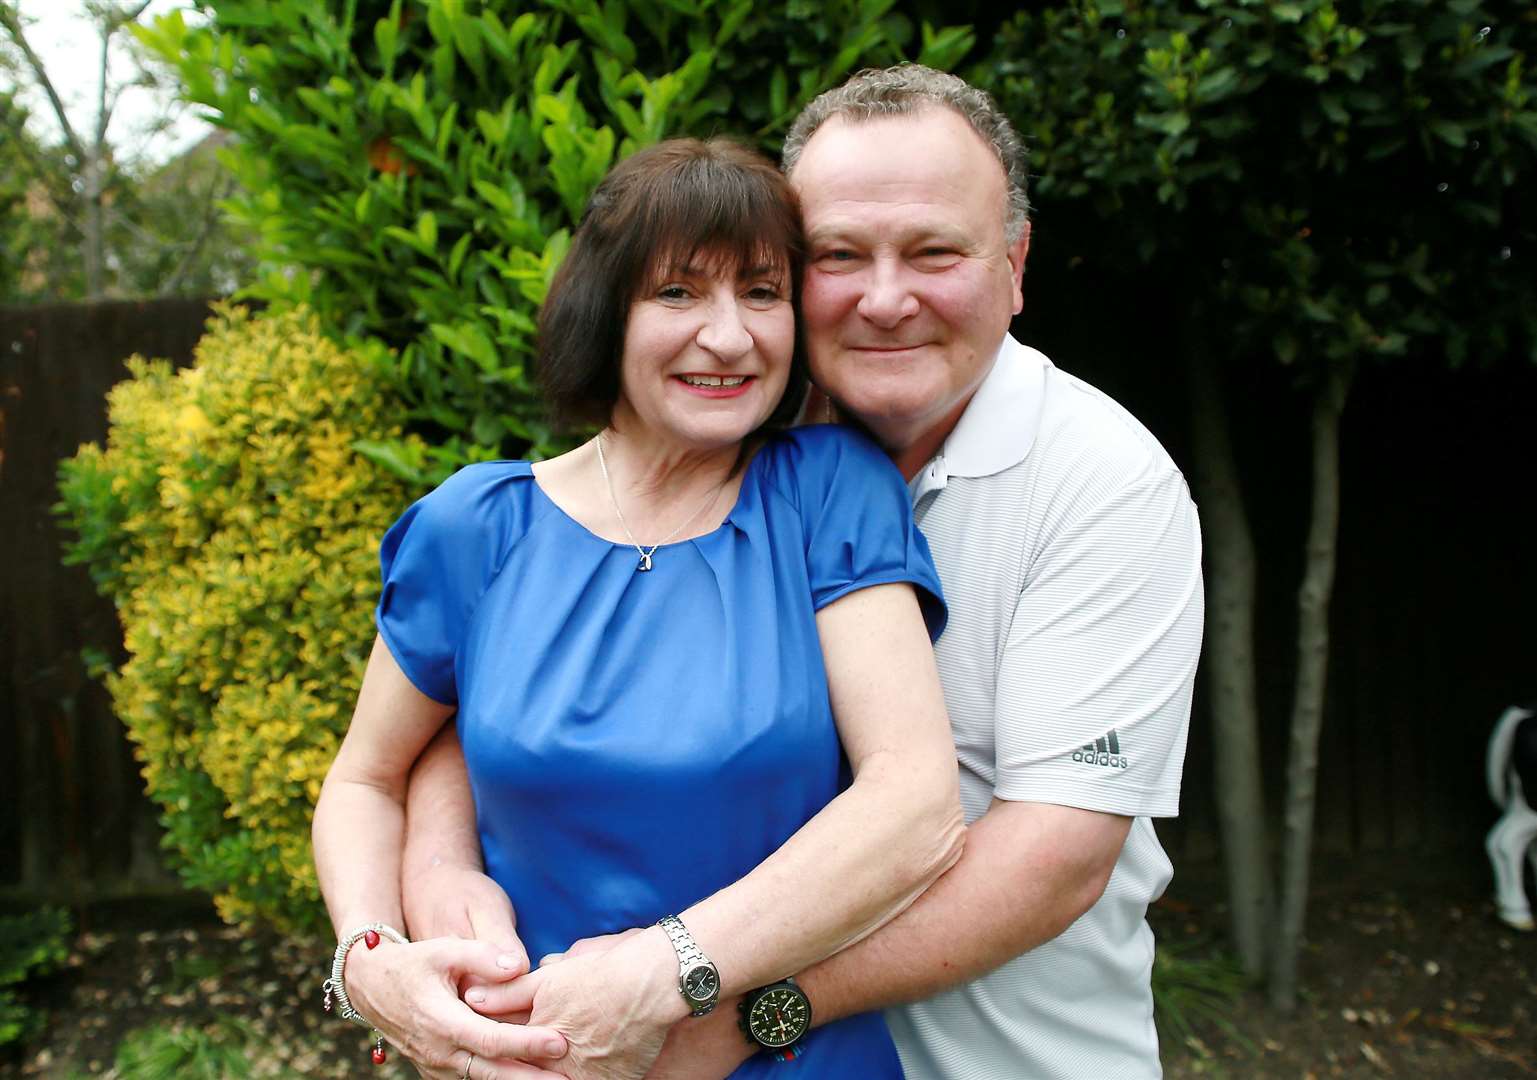 Anita Wheeler and Alex Goodall, from Allington, Maidstone, are getting married in August. Picture: Phil Lee (10667082)